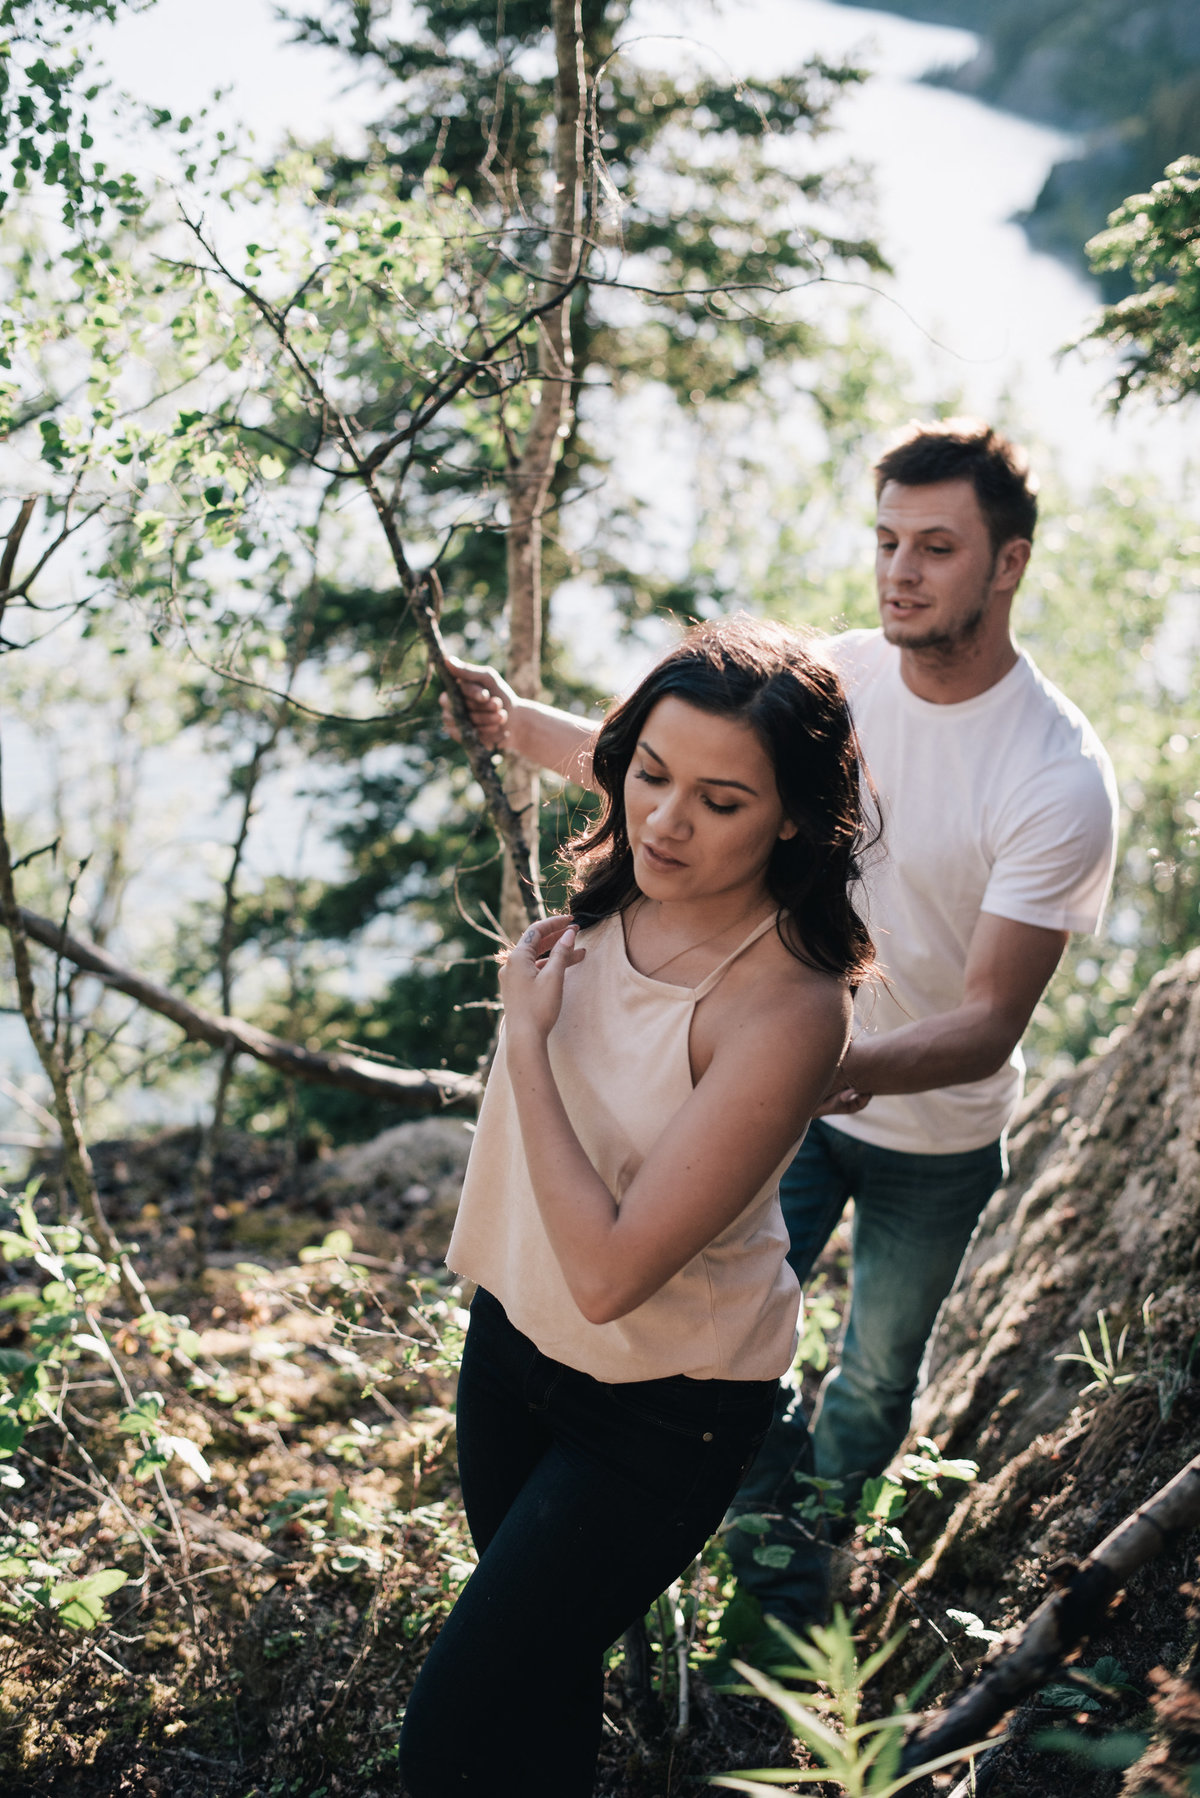 005_Erica Rose Photography_Anchorage Engagement Photographer